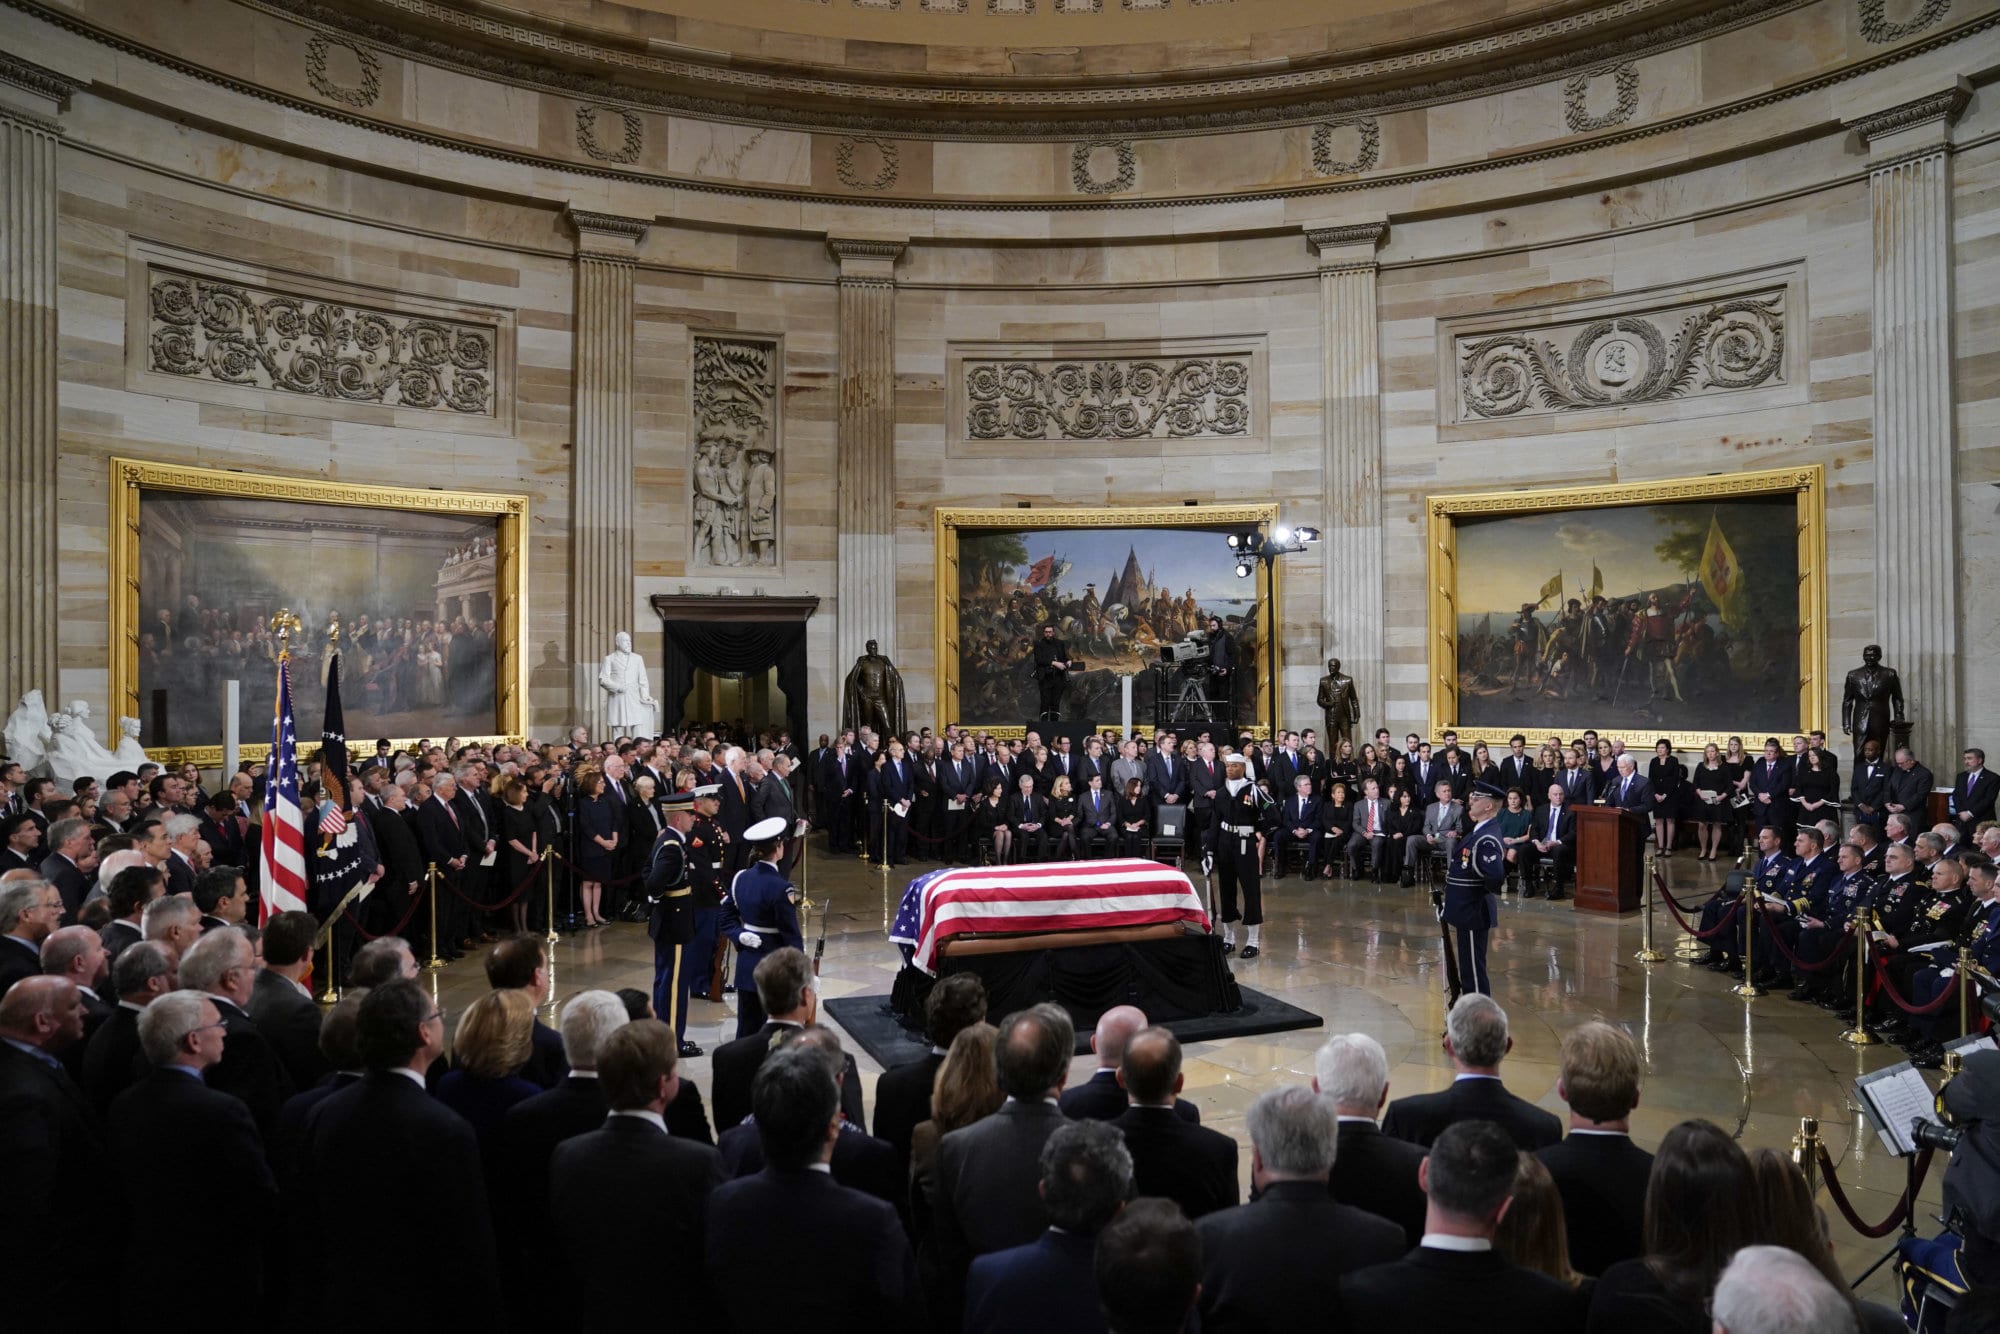 Vice President Mike Pence, right, speaks at the podium during services for former President George H.W. Bush in the Capitol Rotunda in Washington, Monday, Dec. 3, 2018. (AP Photo/Pablo Martinez Monsivais/Pool)